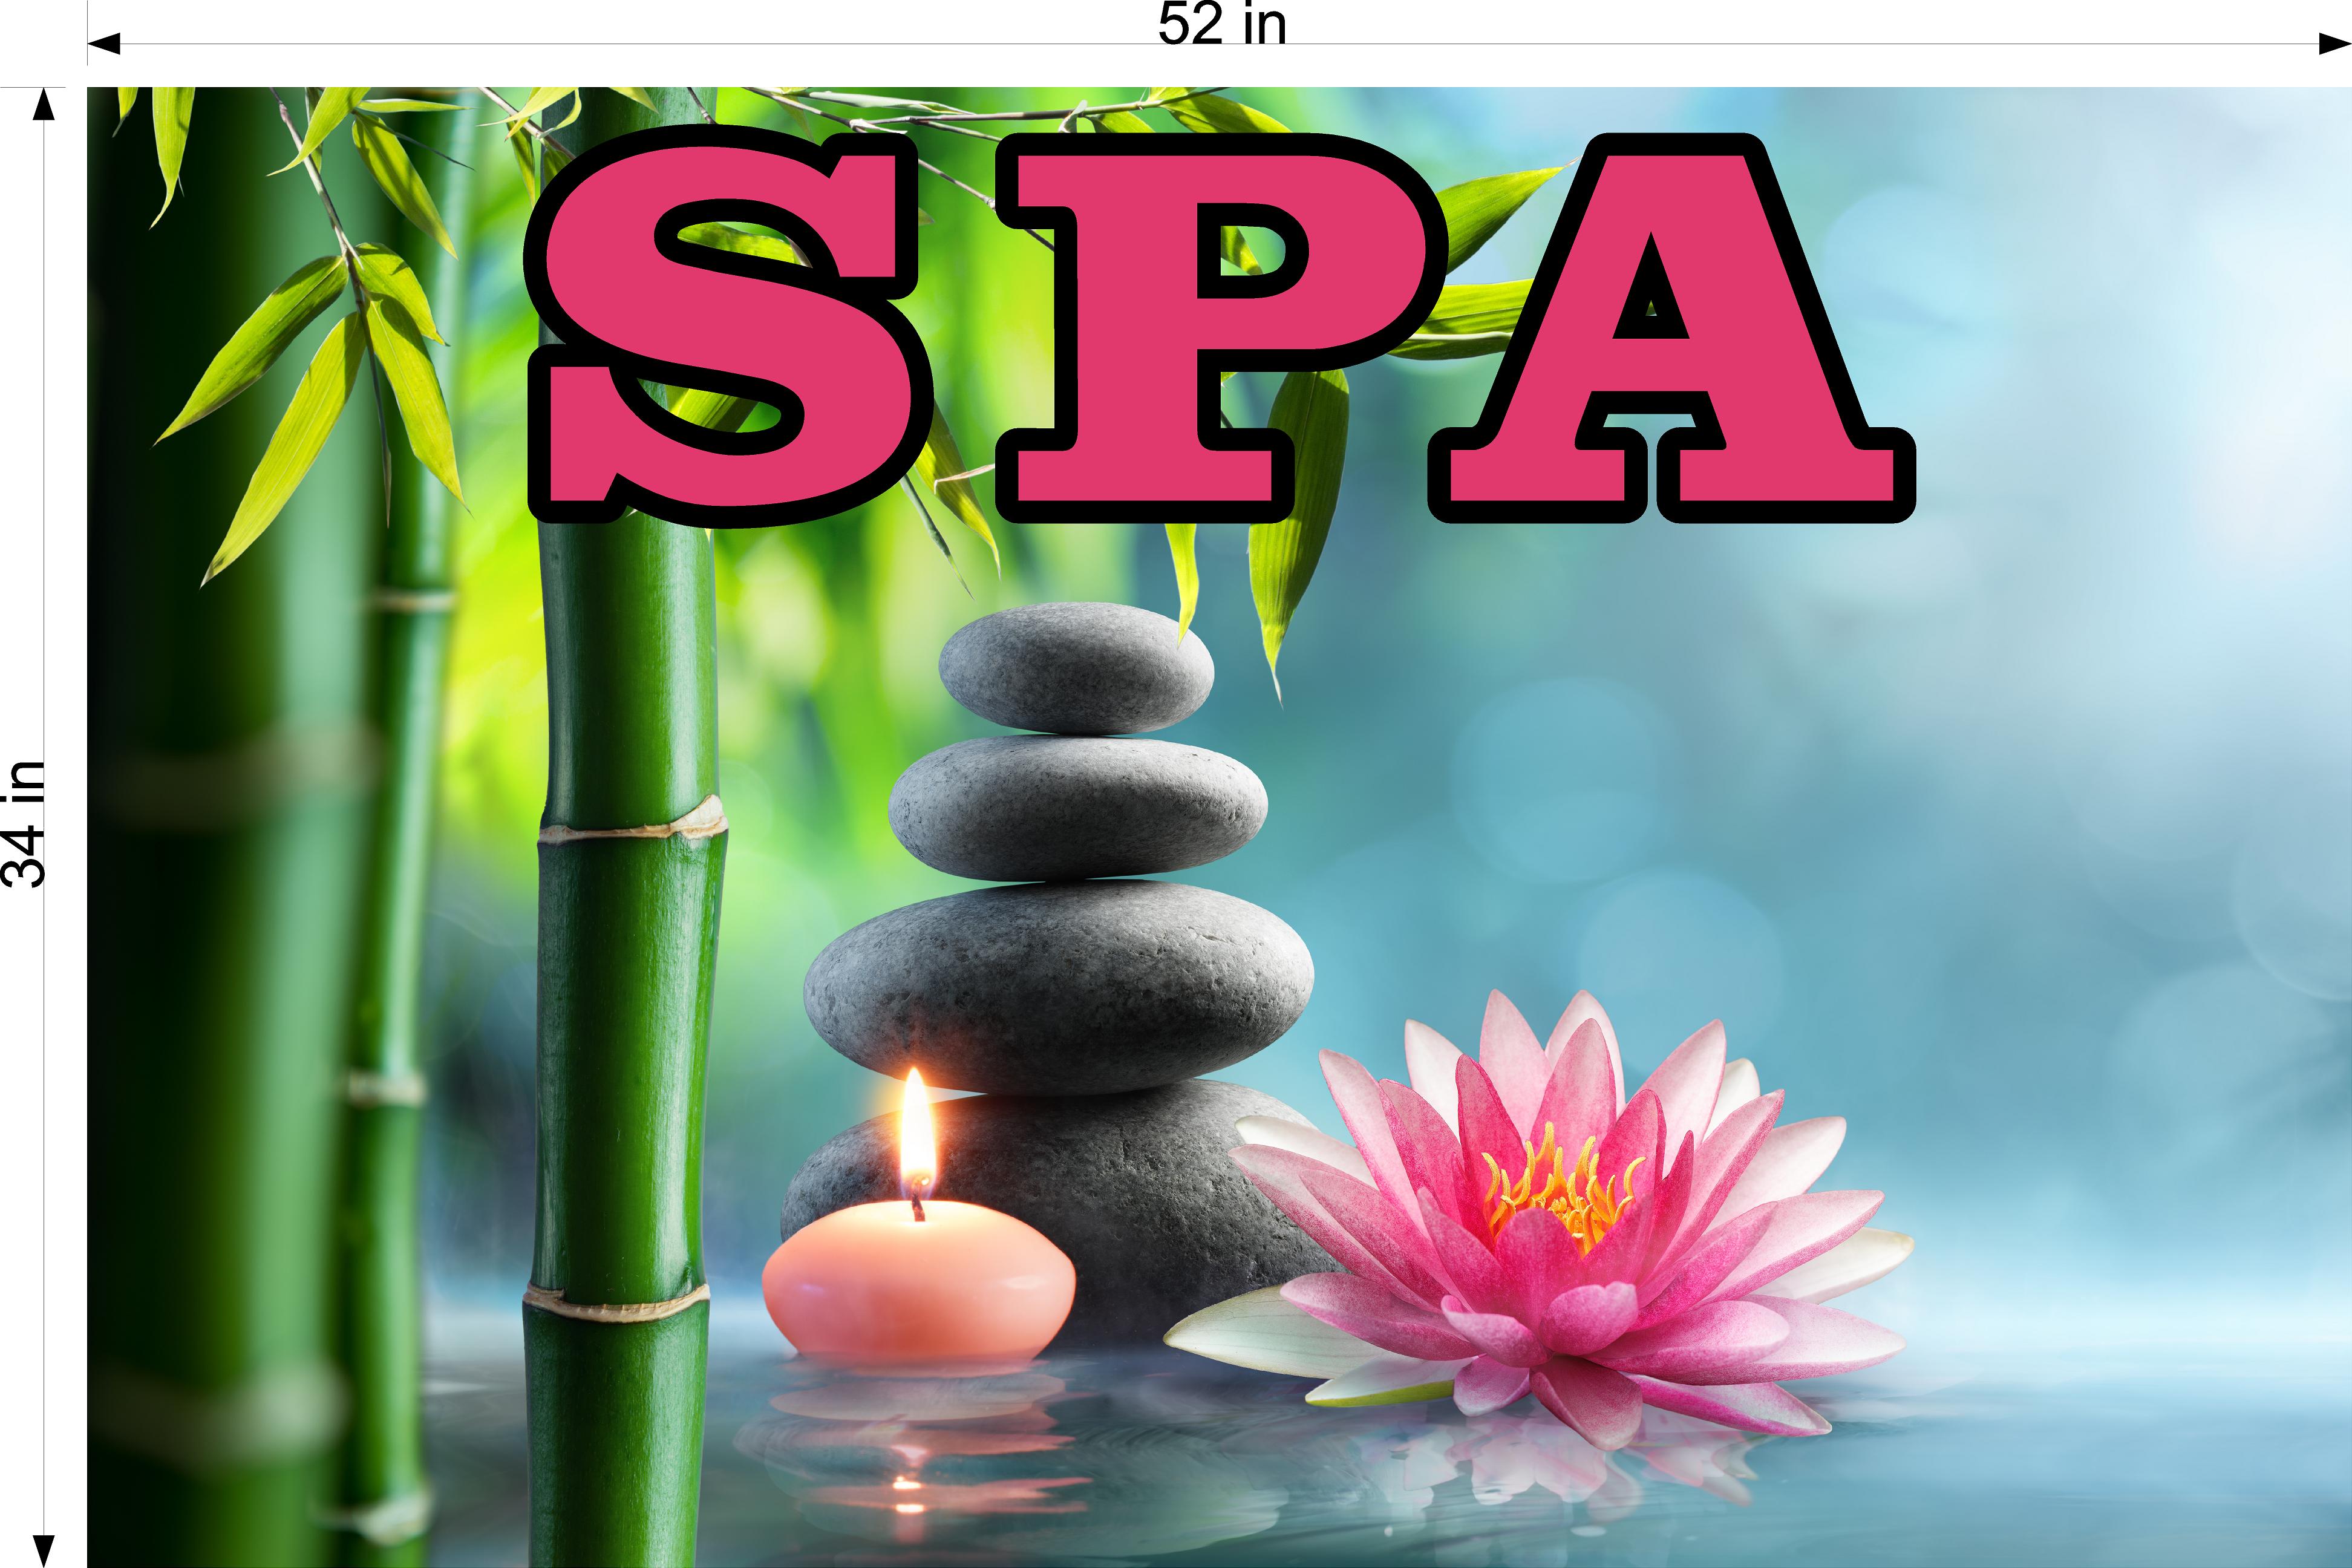 Spa 09 Wallpaper Poster Decal with Adhesive Backing Wall Sticker Decor Indoors Interior Sign Horizontal